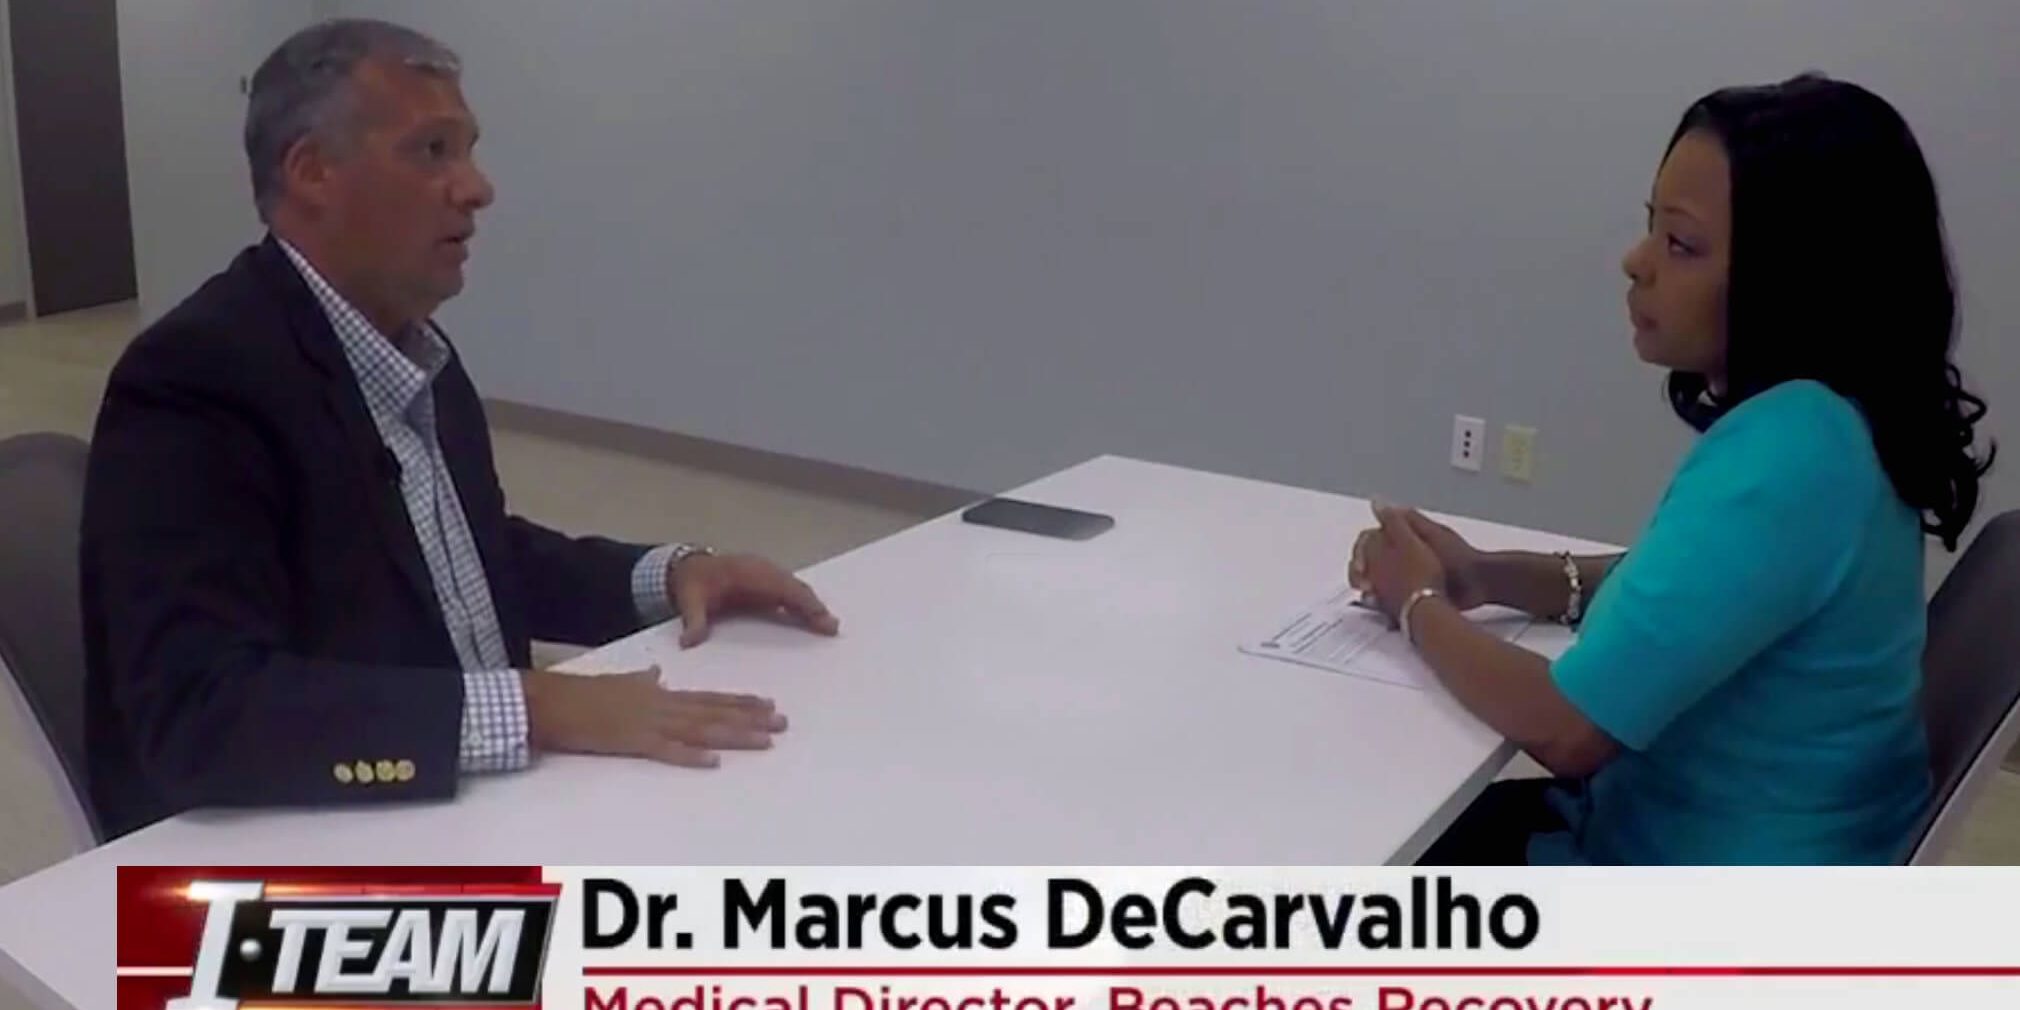 News Coverage of Dr. Marcus DeCarvalho